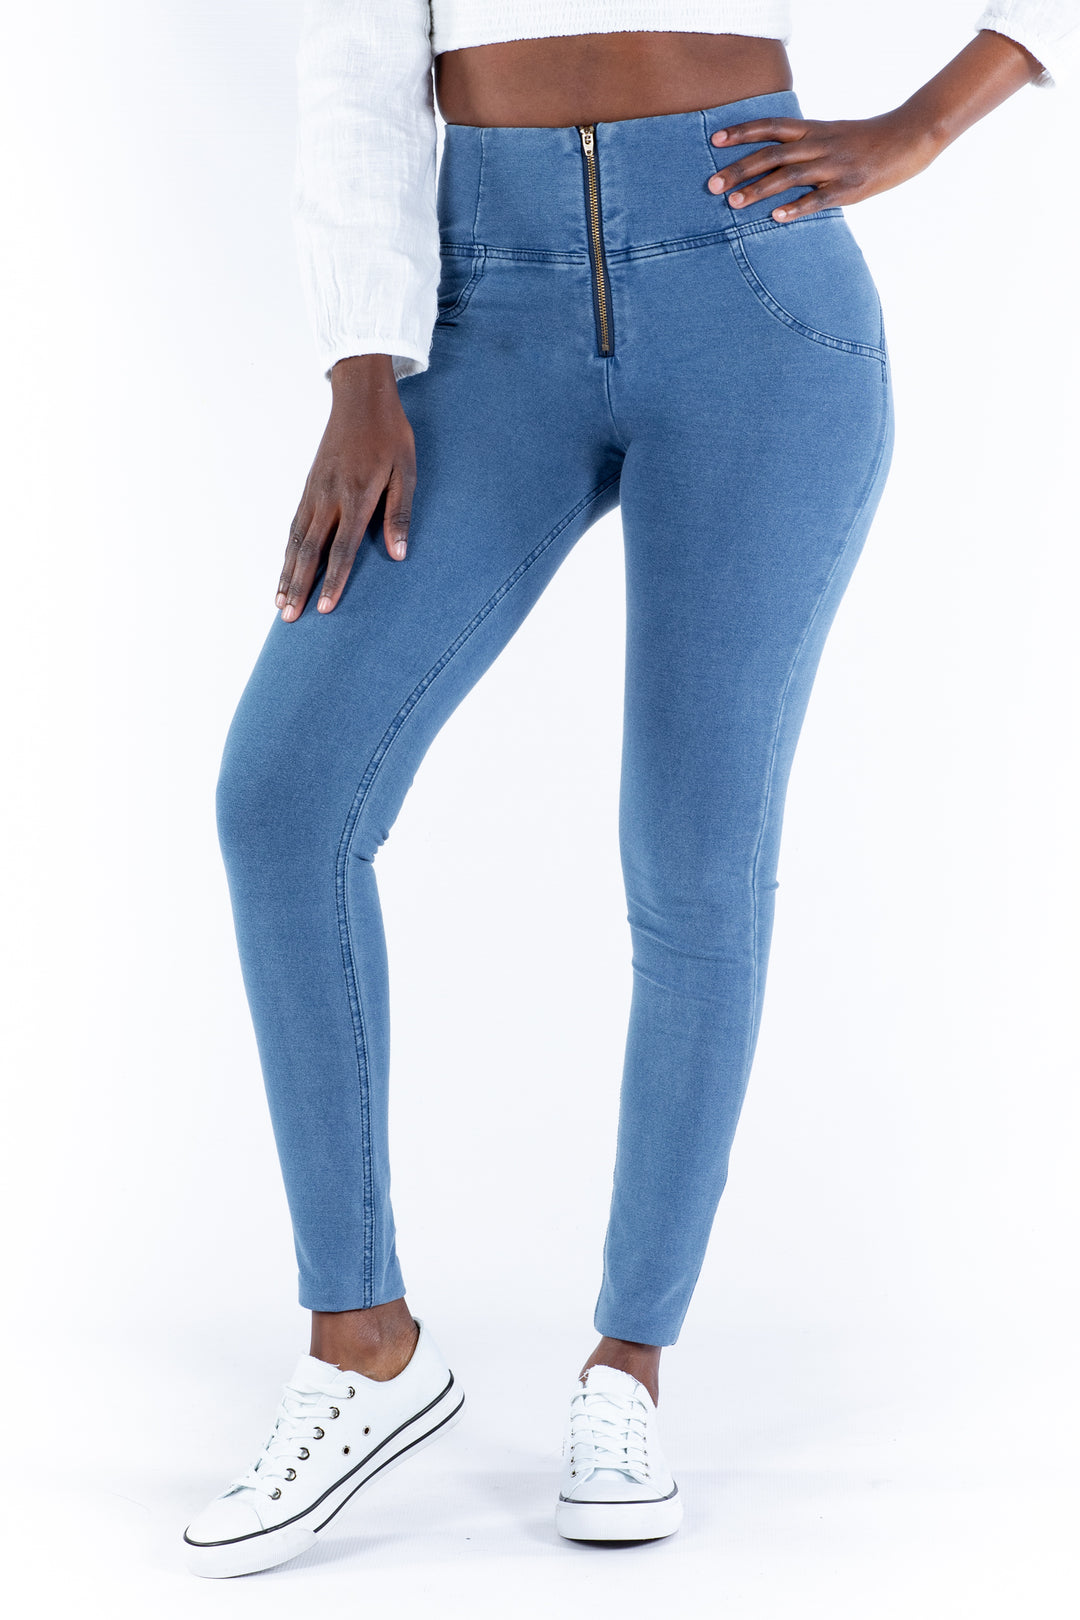 Preet's Boutique - High-waist Denim Jeggings Combo pack of 2 Fabric: Denim  Size: Waist - 28 in, Hips - 32 in, Length - 38 in Waist - 30 in, Hips - 34